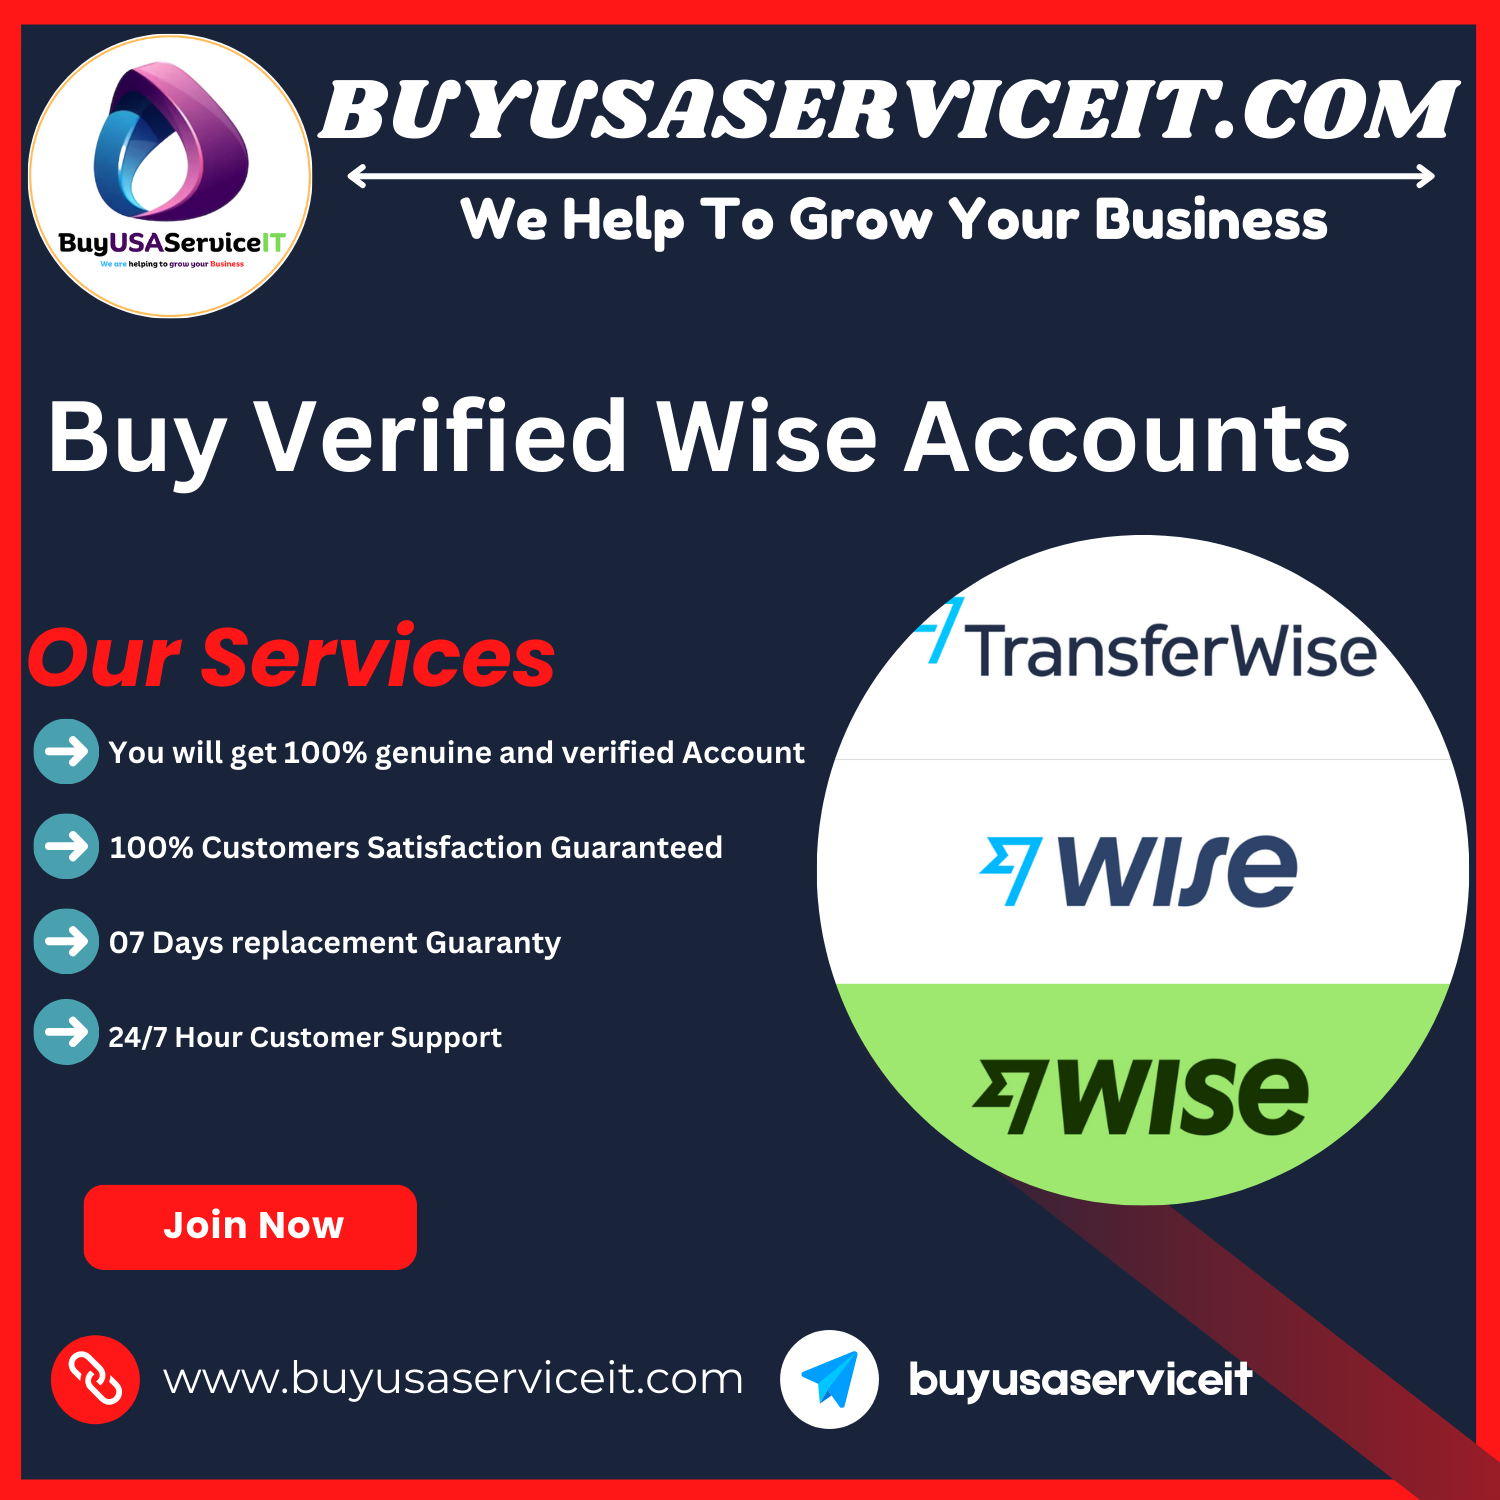 Buy Verified Wise Accounts Full Document With Certified Accounts